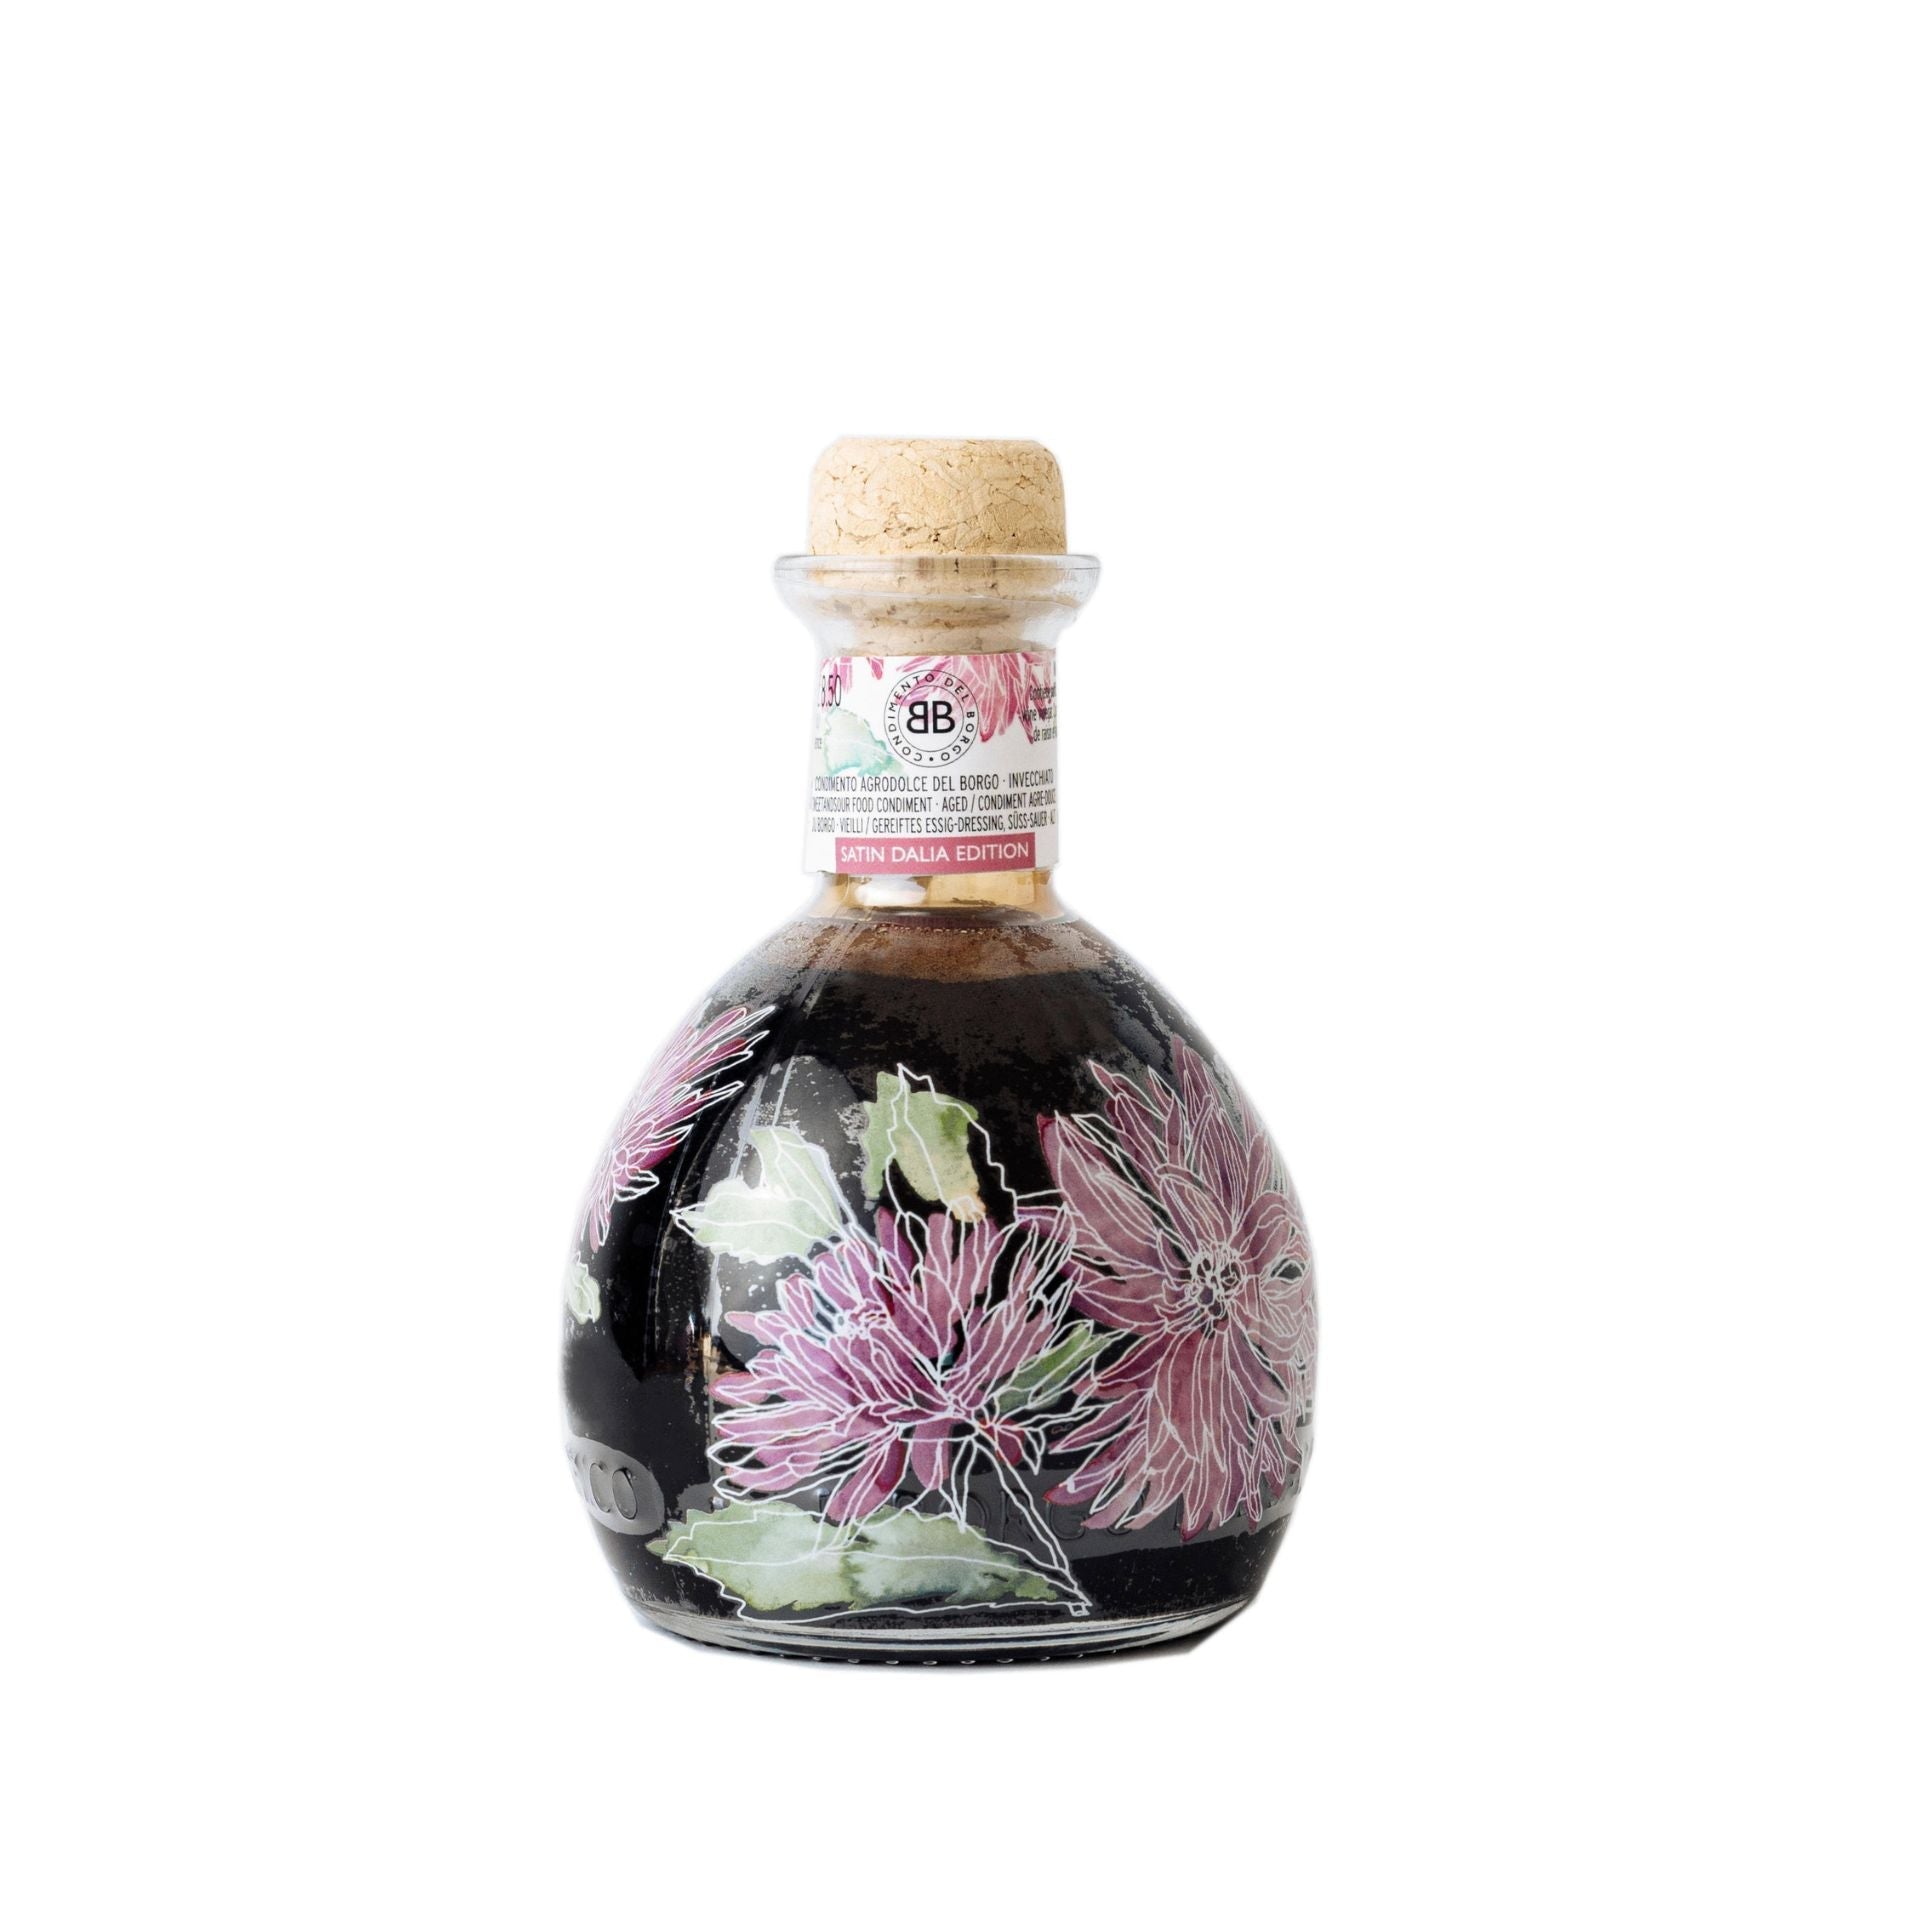 Il Borgo del Balsamico Aged Balsamic Satin Condiment - Dahlia Edition (Ampoule bottle) 250ml  | Imported and distributed in the UK by Just Gourmet Foods